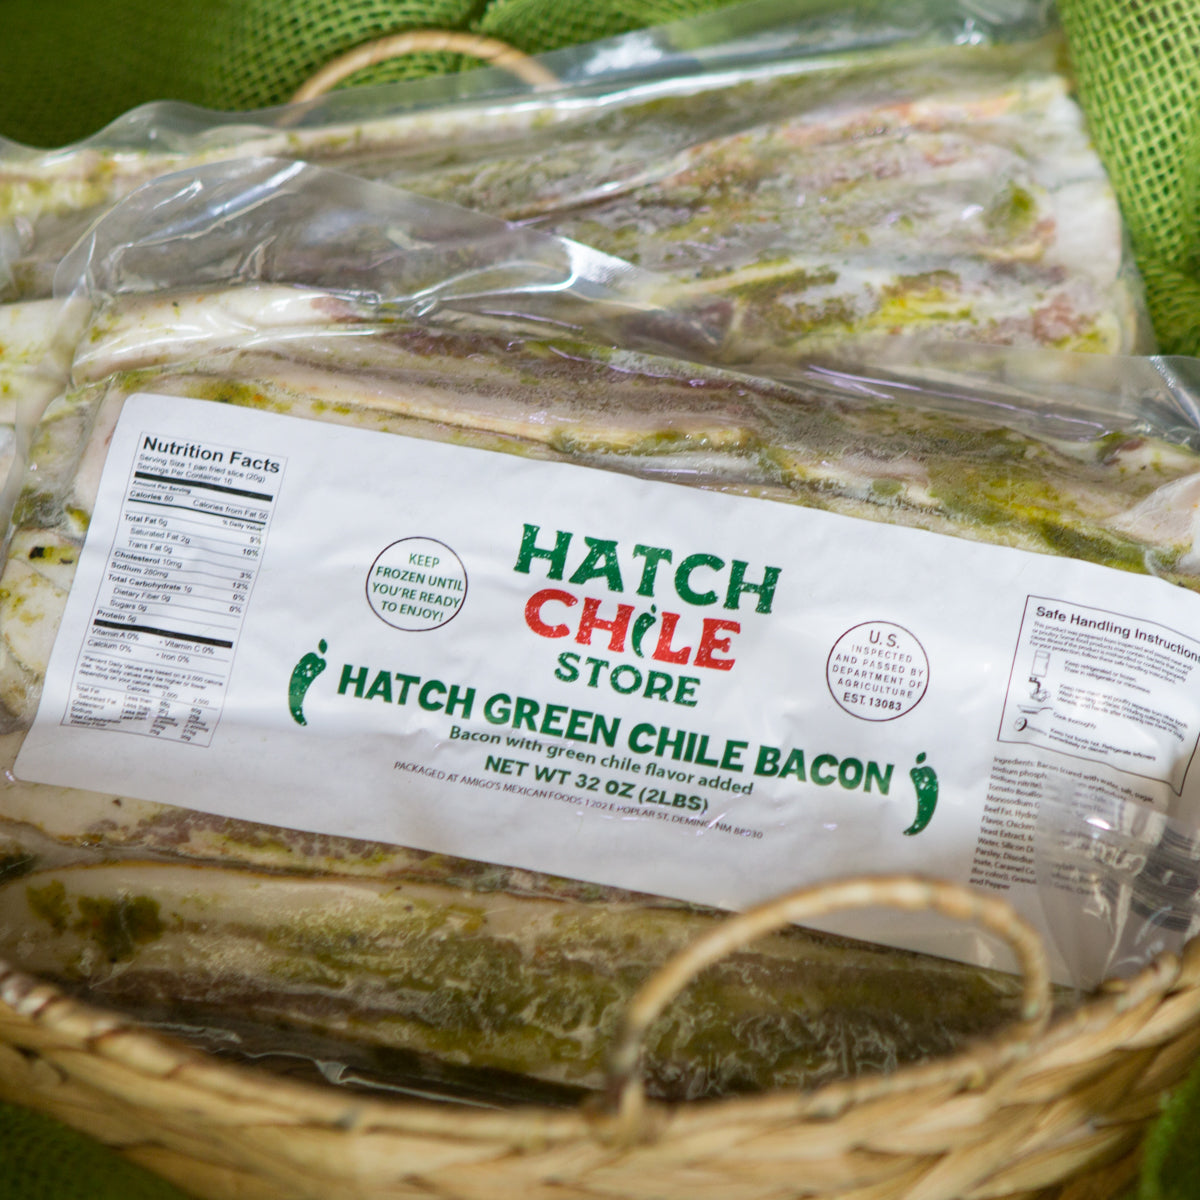 Packages of Hatch Green Chile Bacon in a wicker basket with a green cloth background, emphasizing the nutrition label and product details.